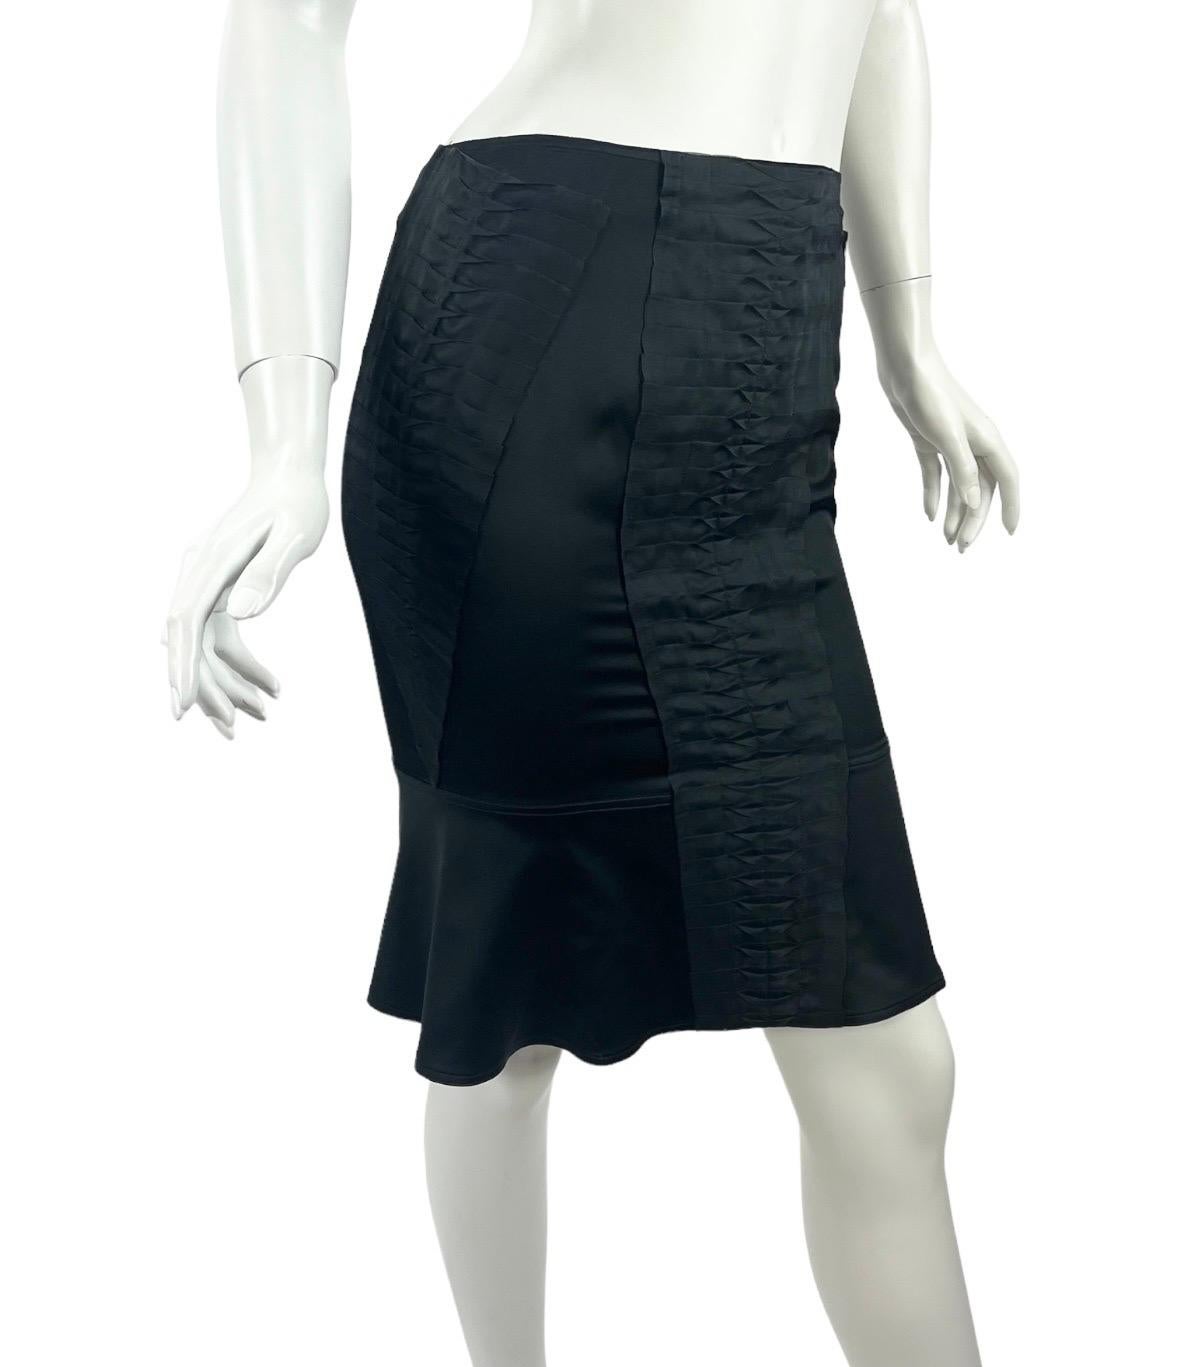 Vintage Tom Ford for Gucci Pleated Silk Skirt,
S/S 2004 Runway Collection
Italian size - 40 
Black 
91% Silk, 9% Spandex
Measurements: Length - 21